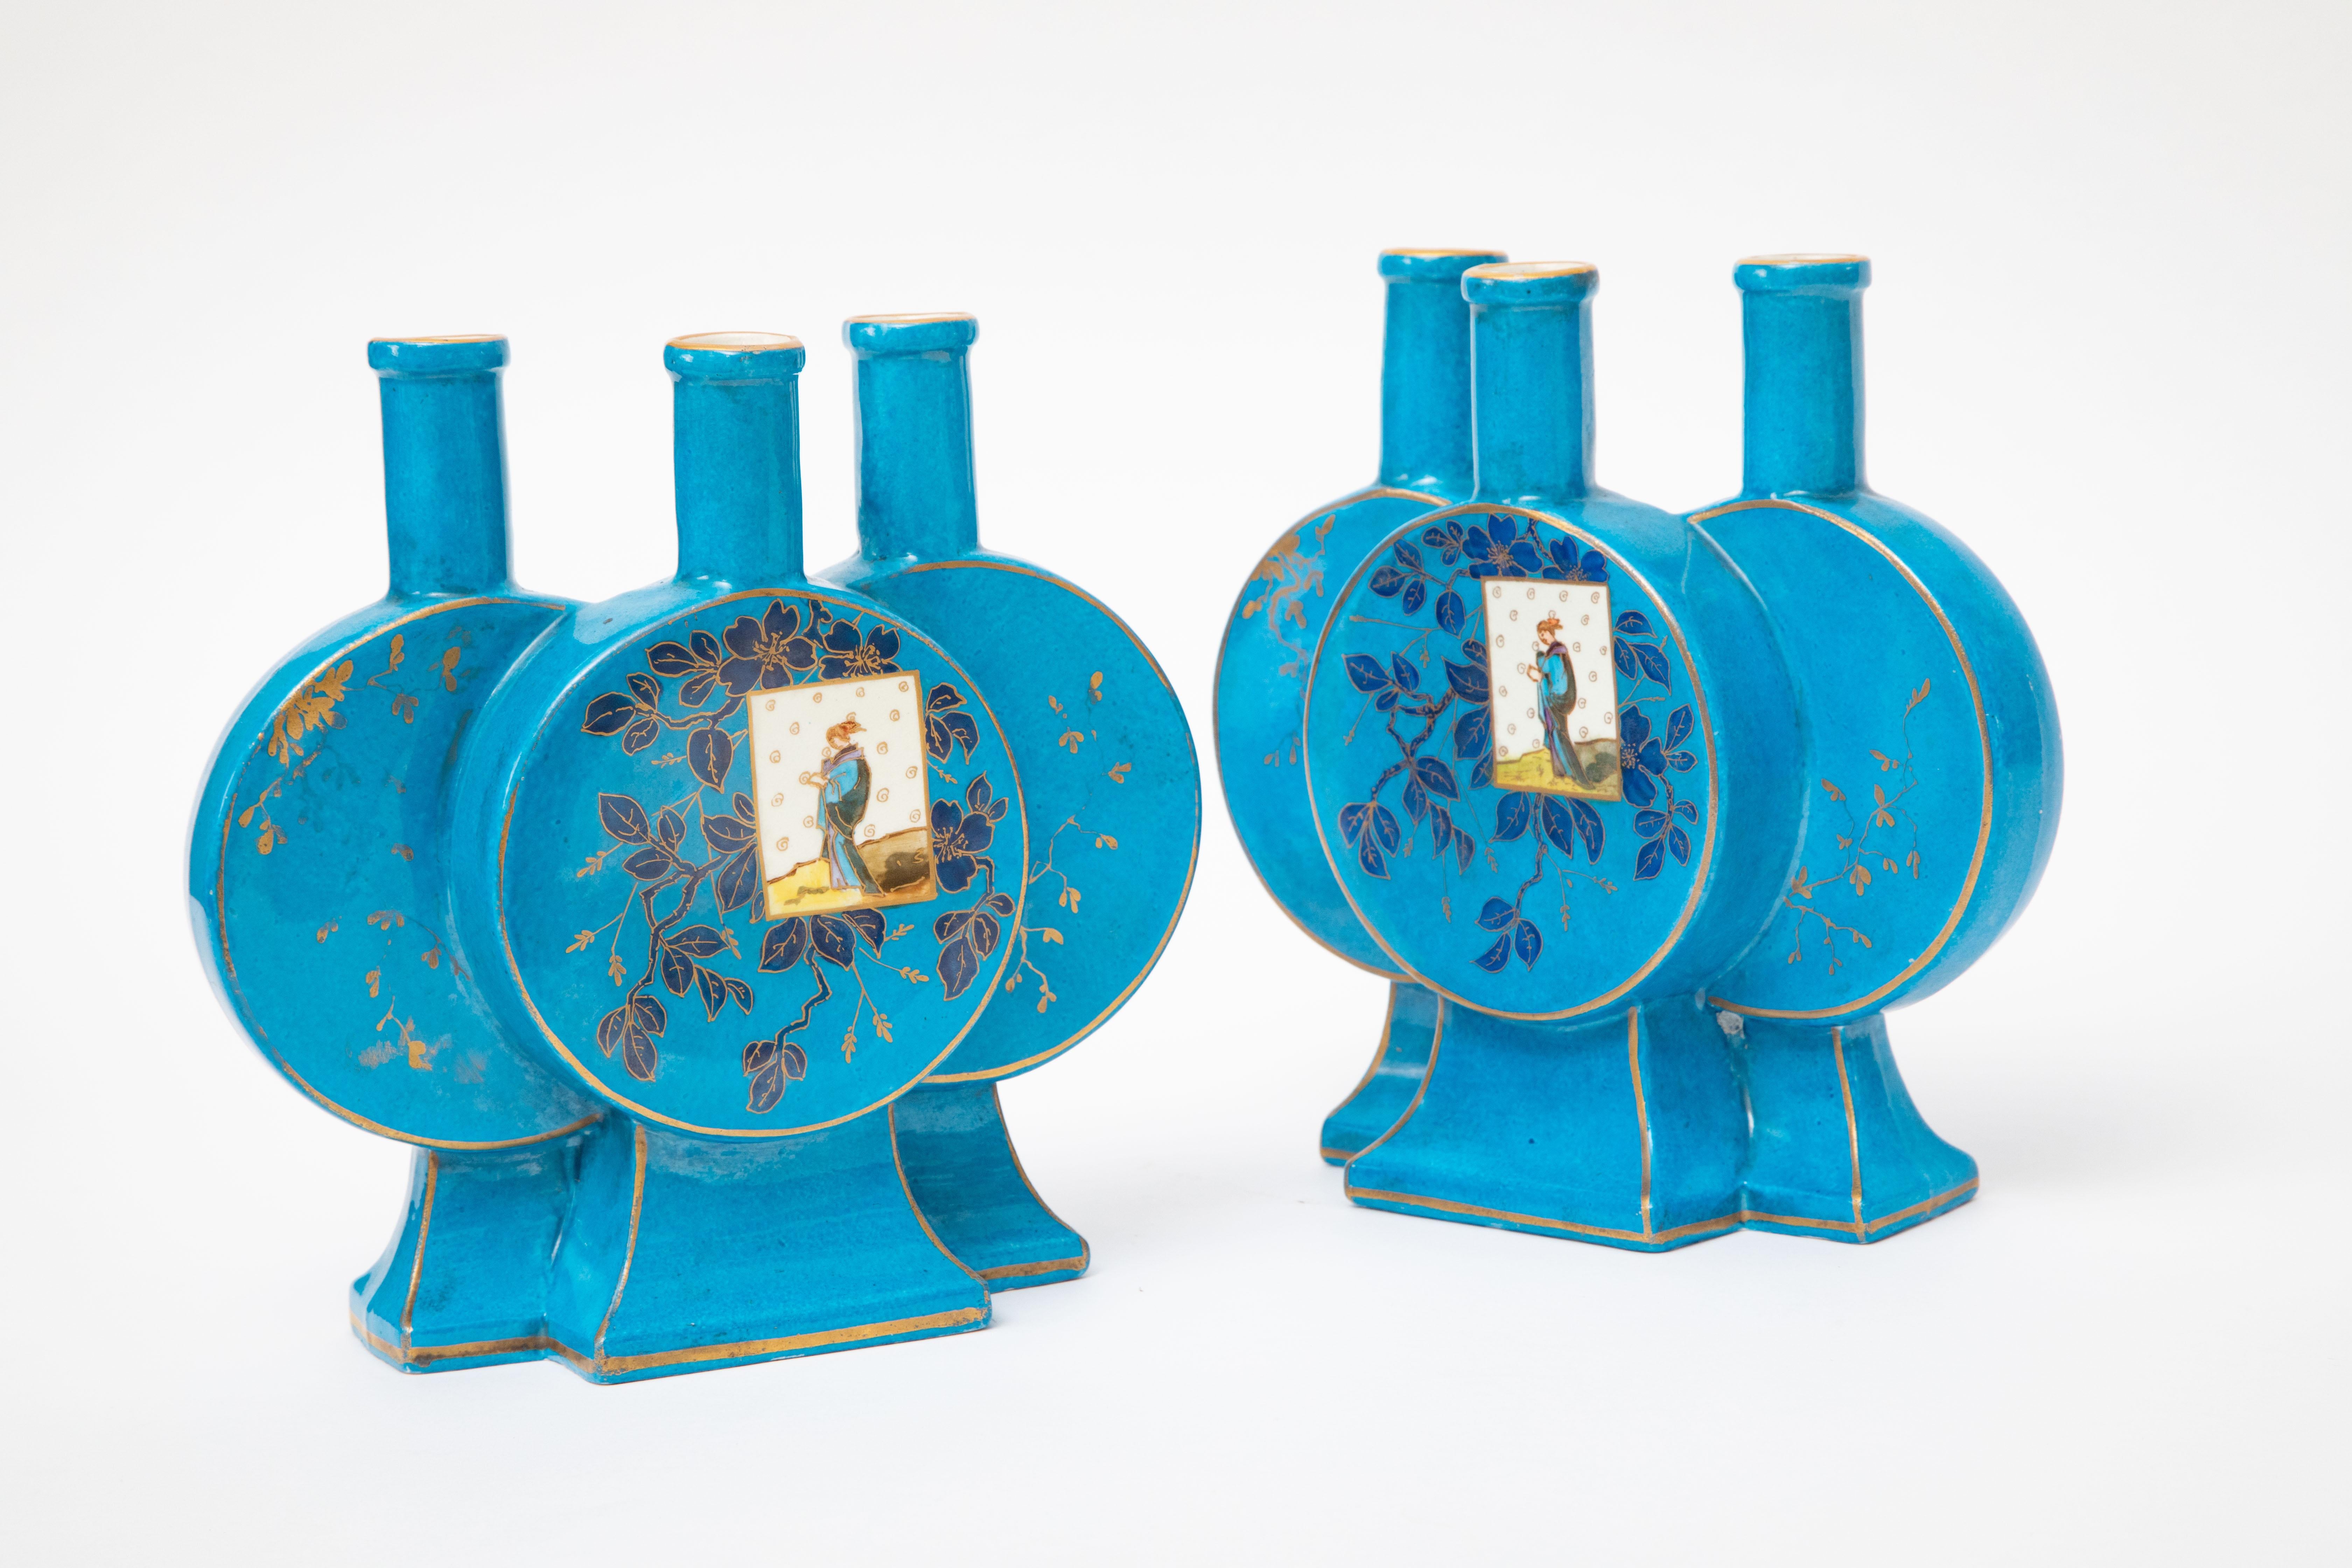 An antique pair of turquoise enamel vases with 3 compartments and panels of interesting chinoiserie figures inset cartouches on the front middle vase section. The unique triple flower holder design and the vibrant decoration makes for a great